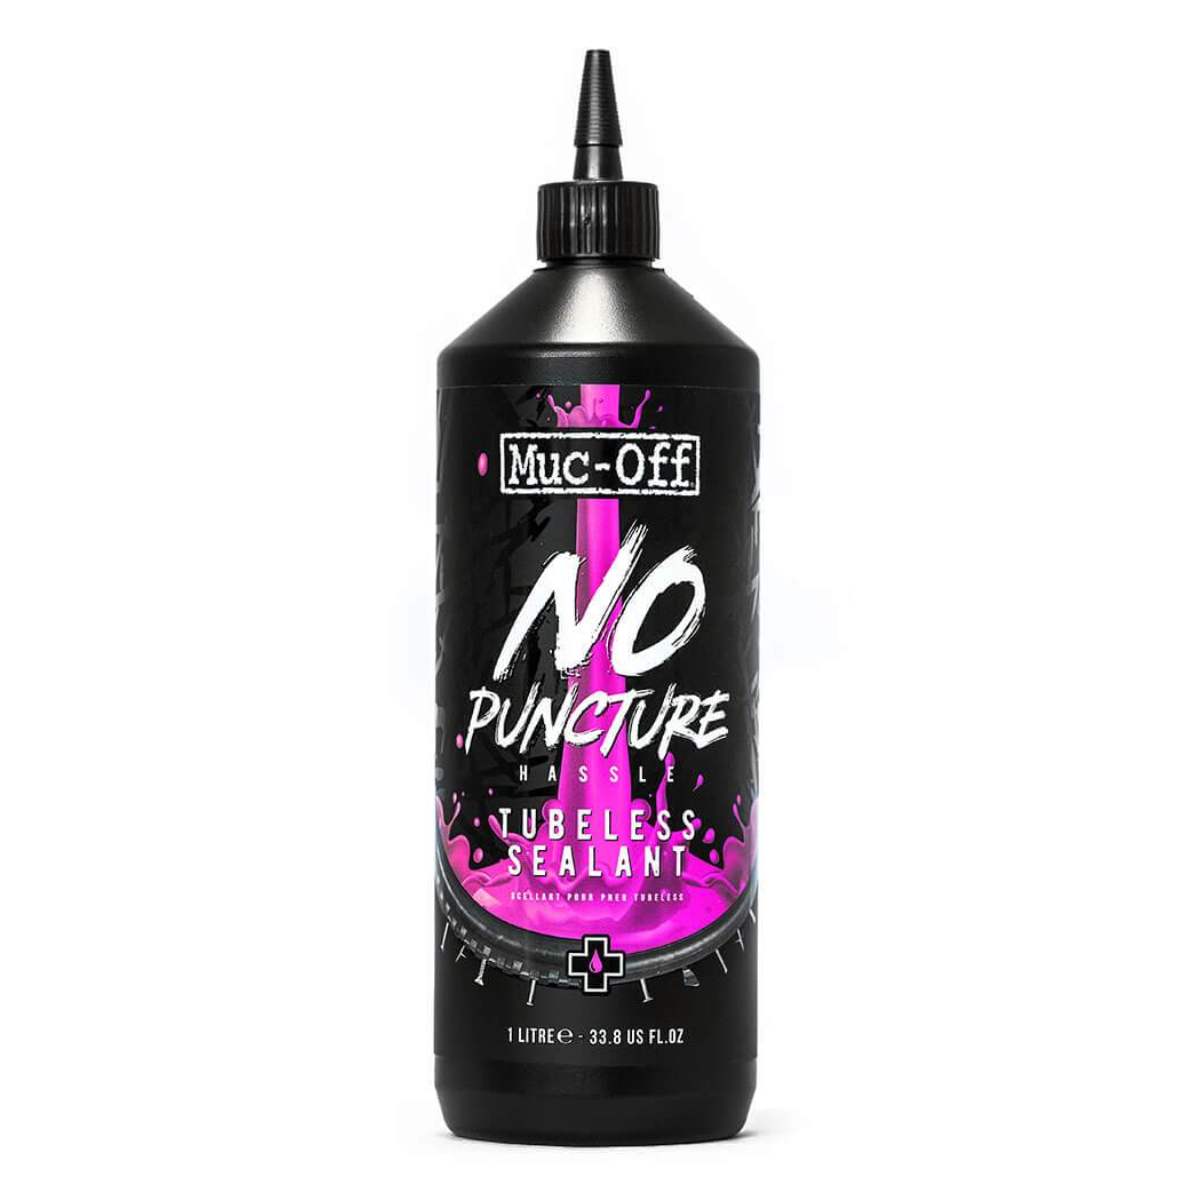 Scellant tubeless muc-off no puncture hassle 1 l